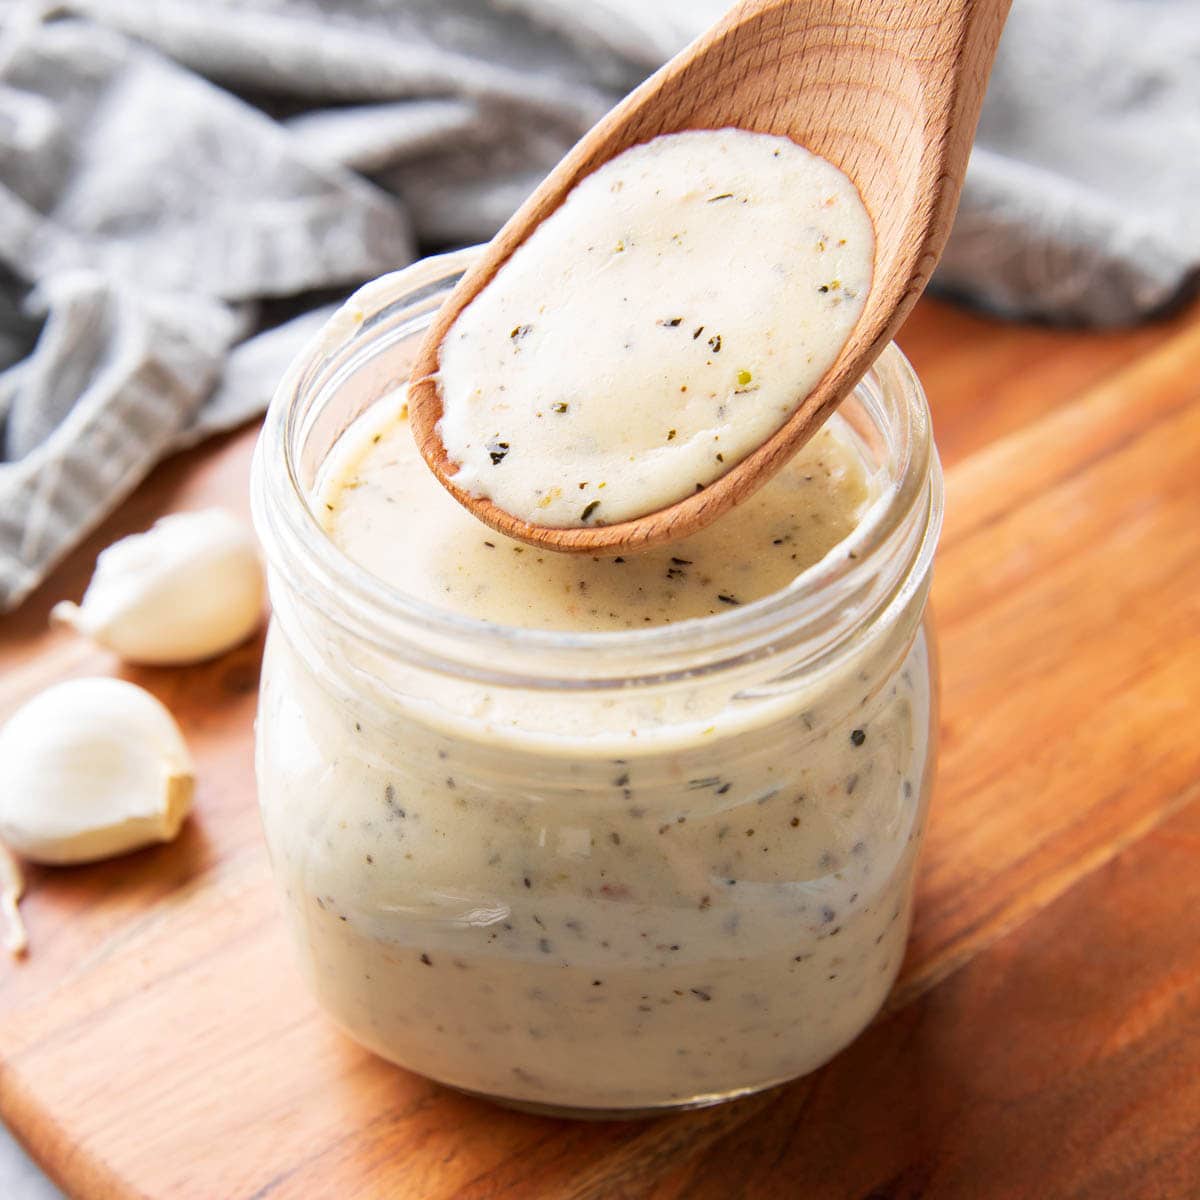 jar filled with creamy, rich garlic parmesan sauce thickened with cheese and herbs